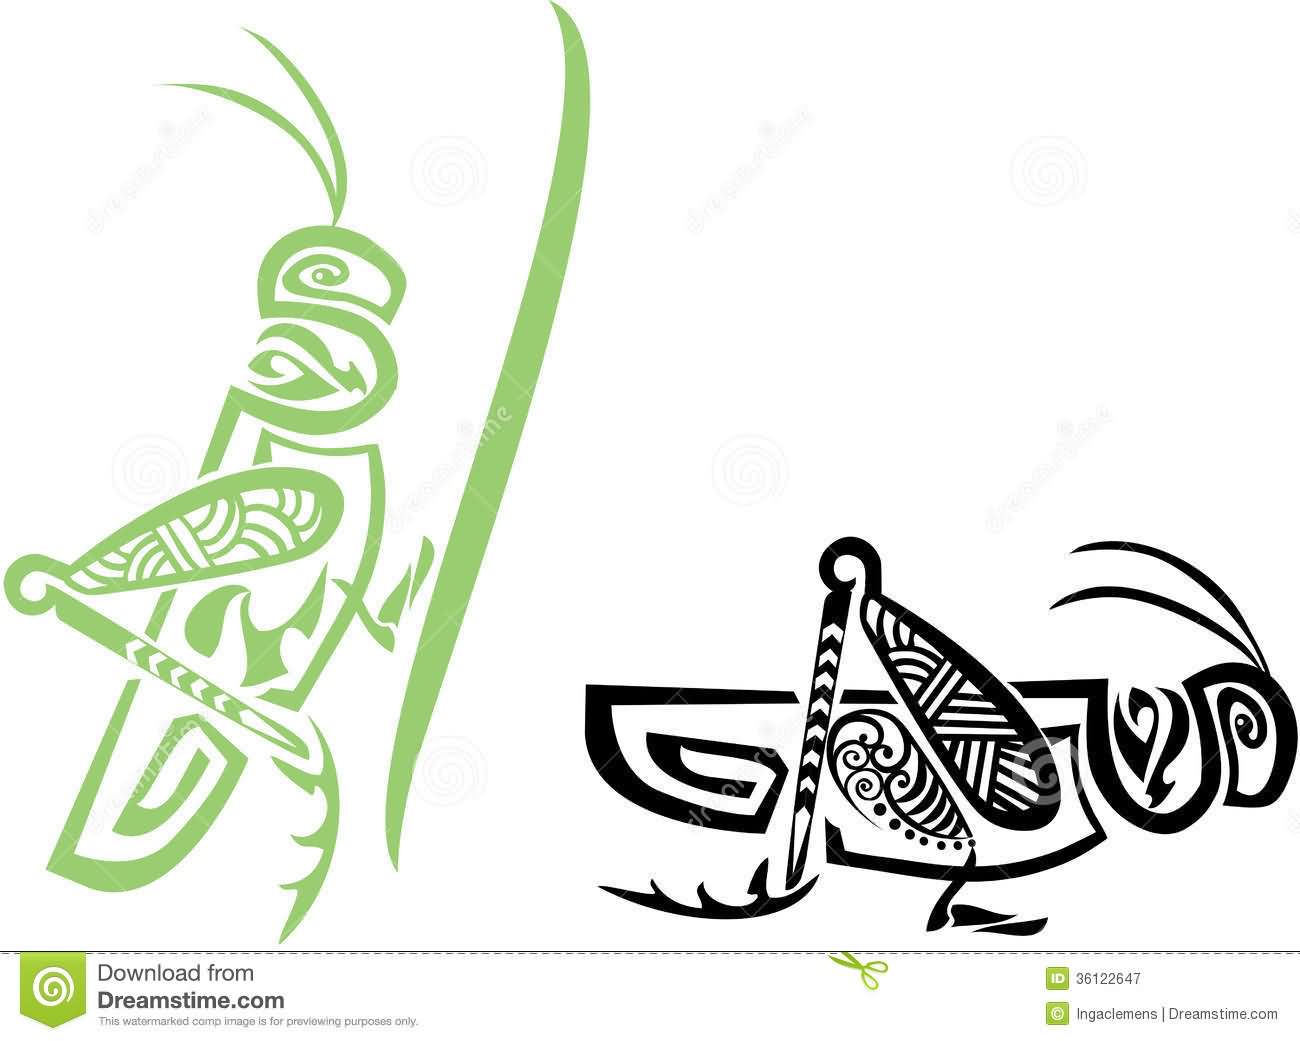 Attractive Green And Black Outline Two Grasshopper Tattoo Design